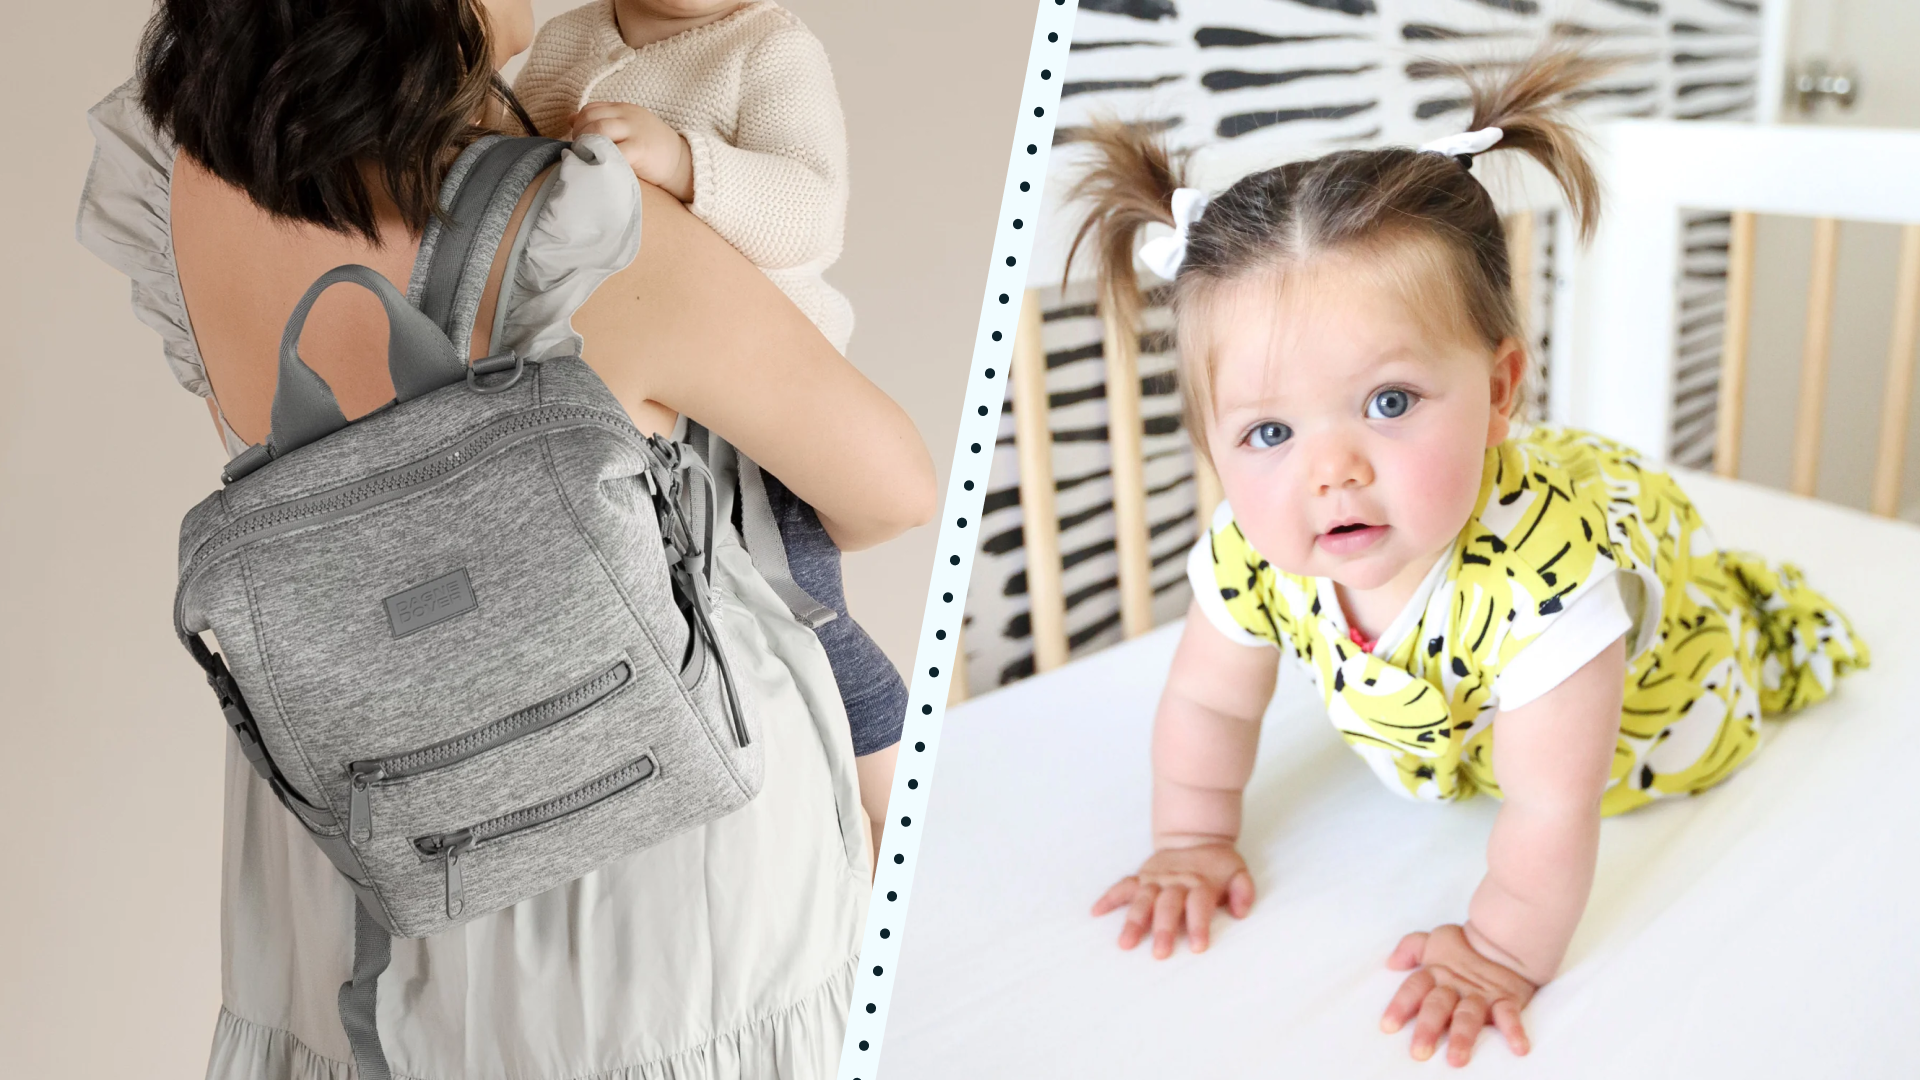 products that'll help parents take care of their kids